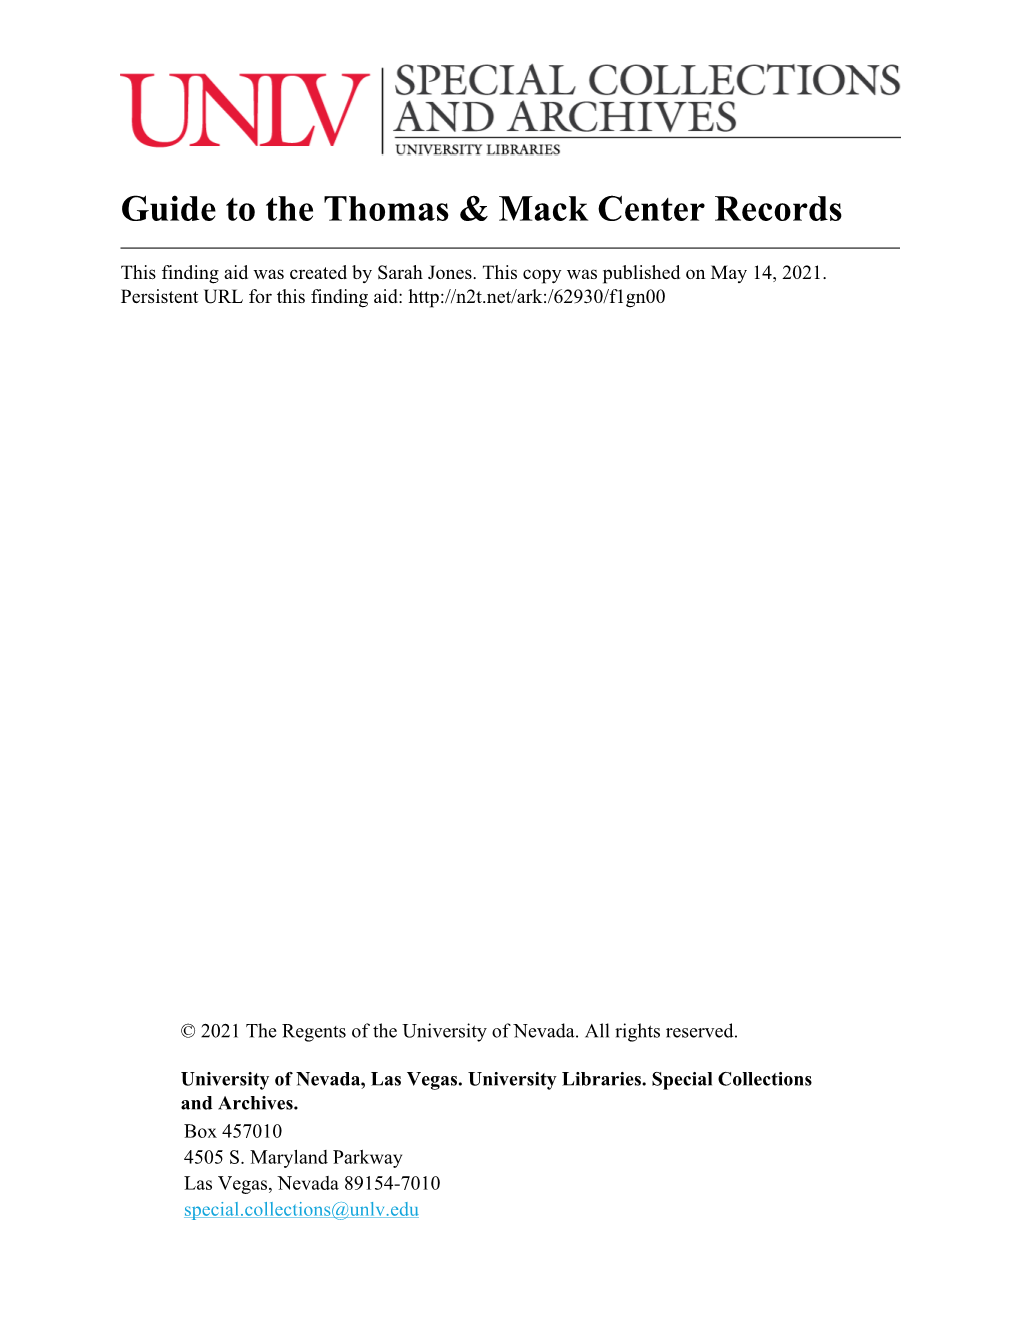 Guide to the Thomas & Mack Center Records